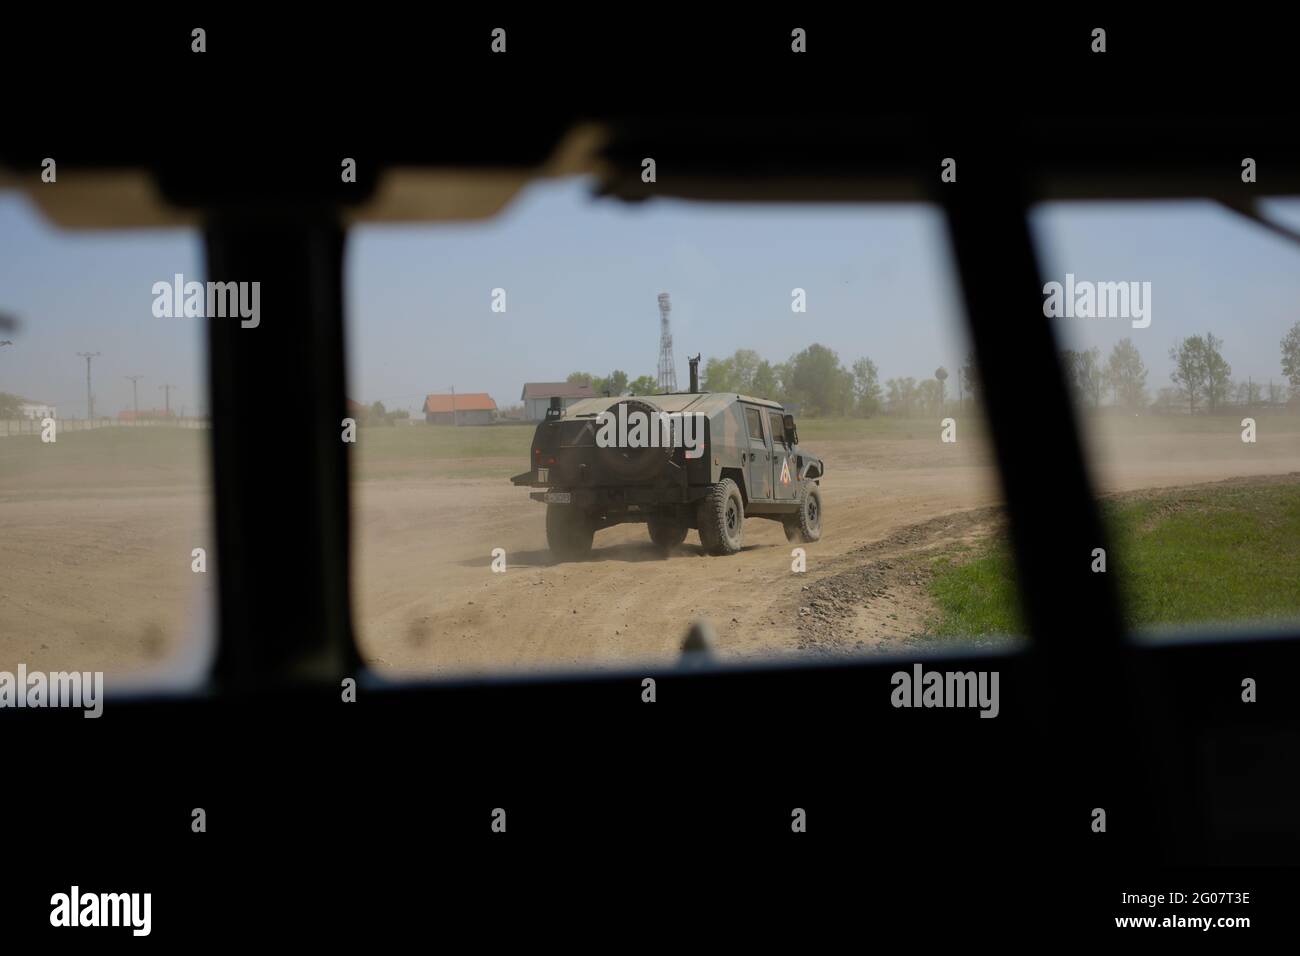 Smardan, Romania - May 11, 2021: Romanian Army Uro Vamtac armored vehicle seen from another armored vehicle, in Smardan firing range. Stock Photo